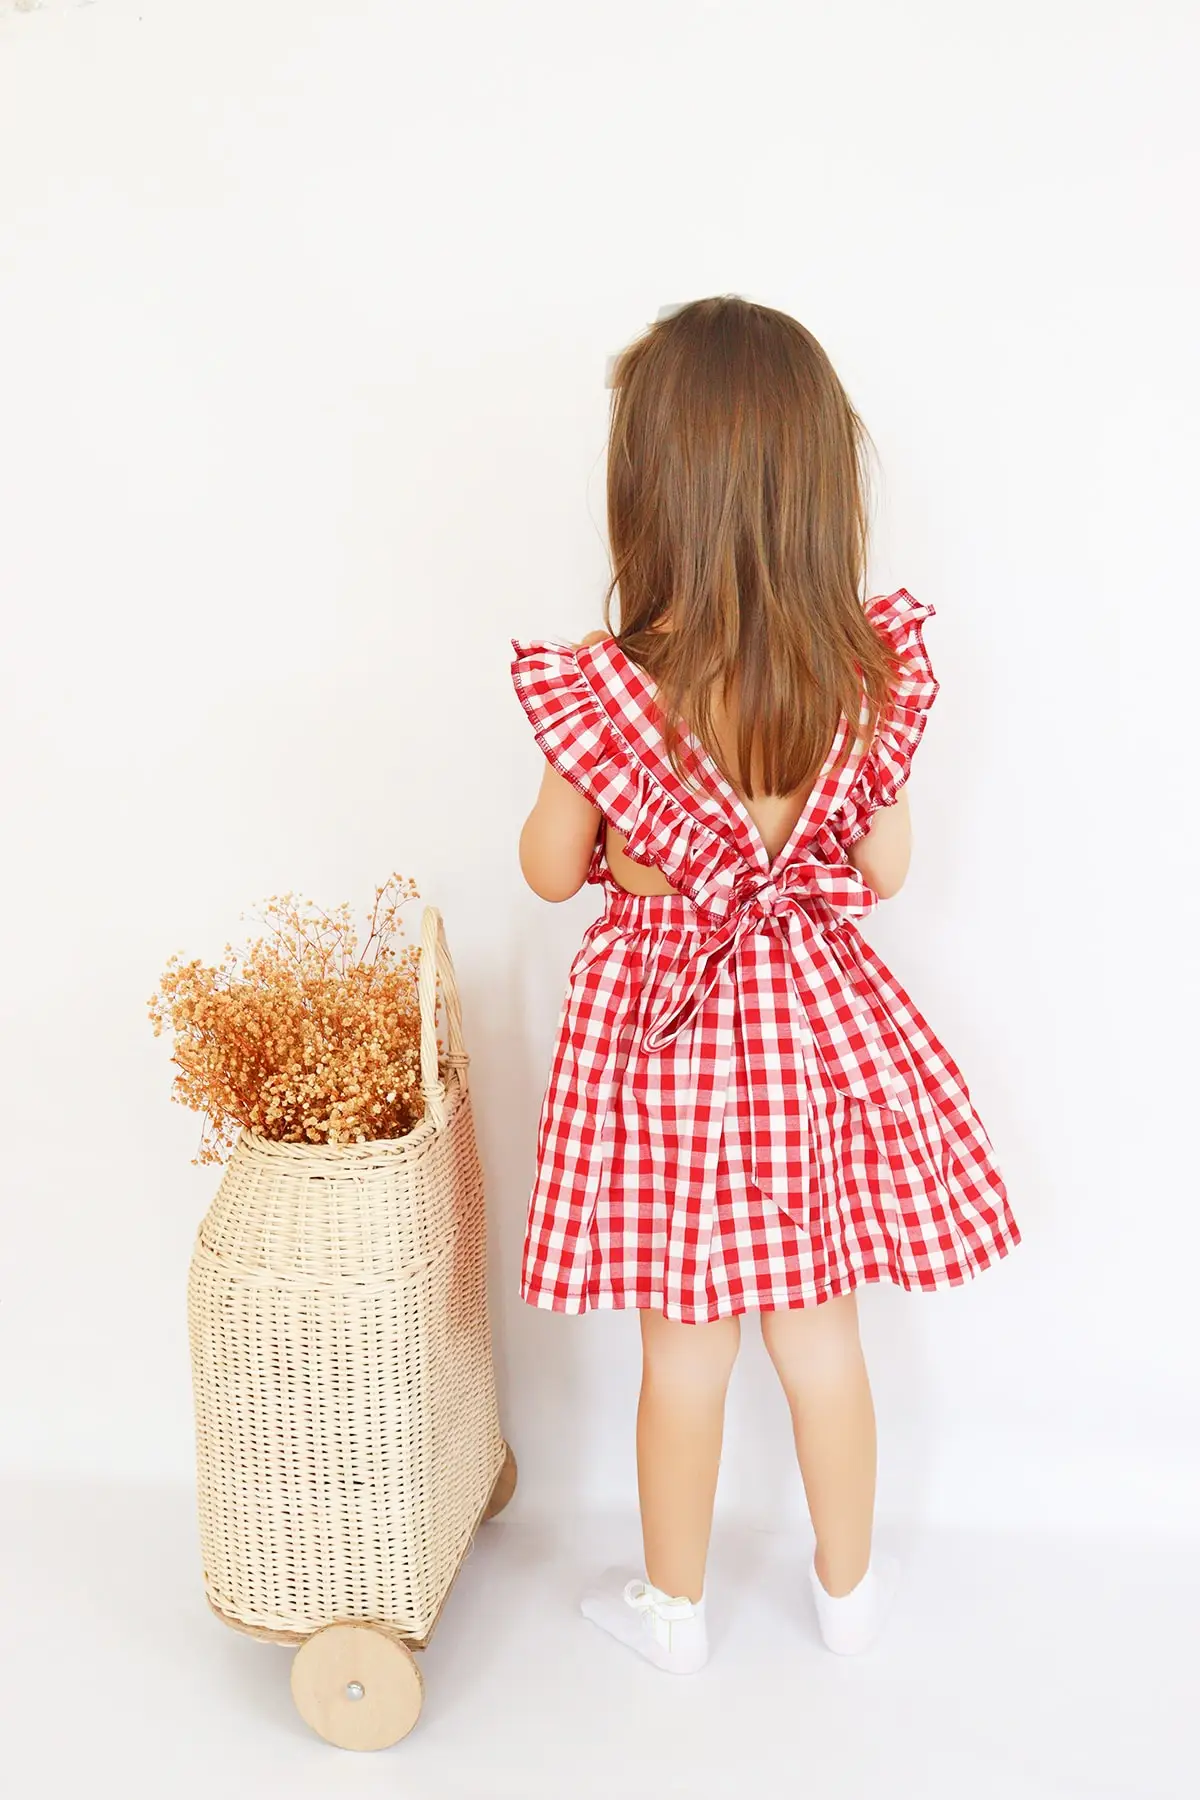 

Girls' Violetta Red Gingham Ruffled Tie Detailed Dress Bandana Suit Woven Cotton Strap Plaid